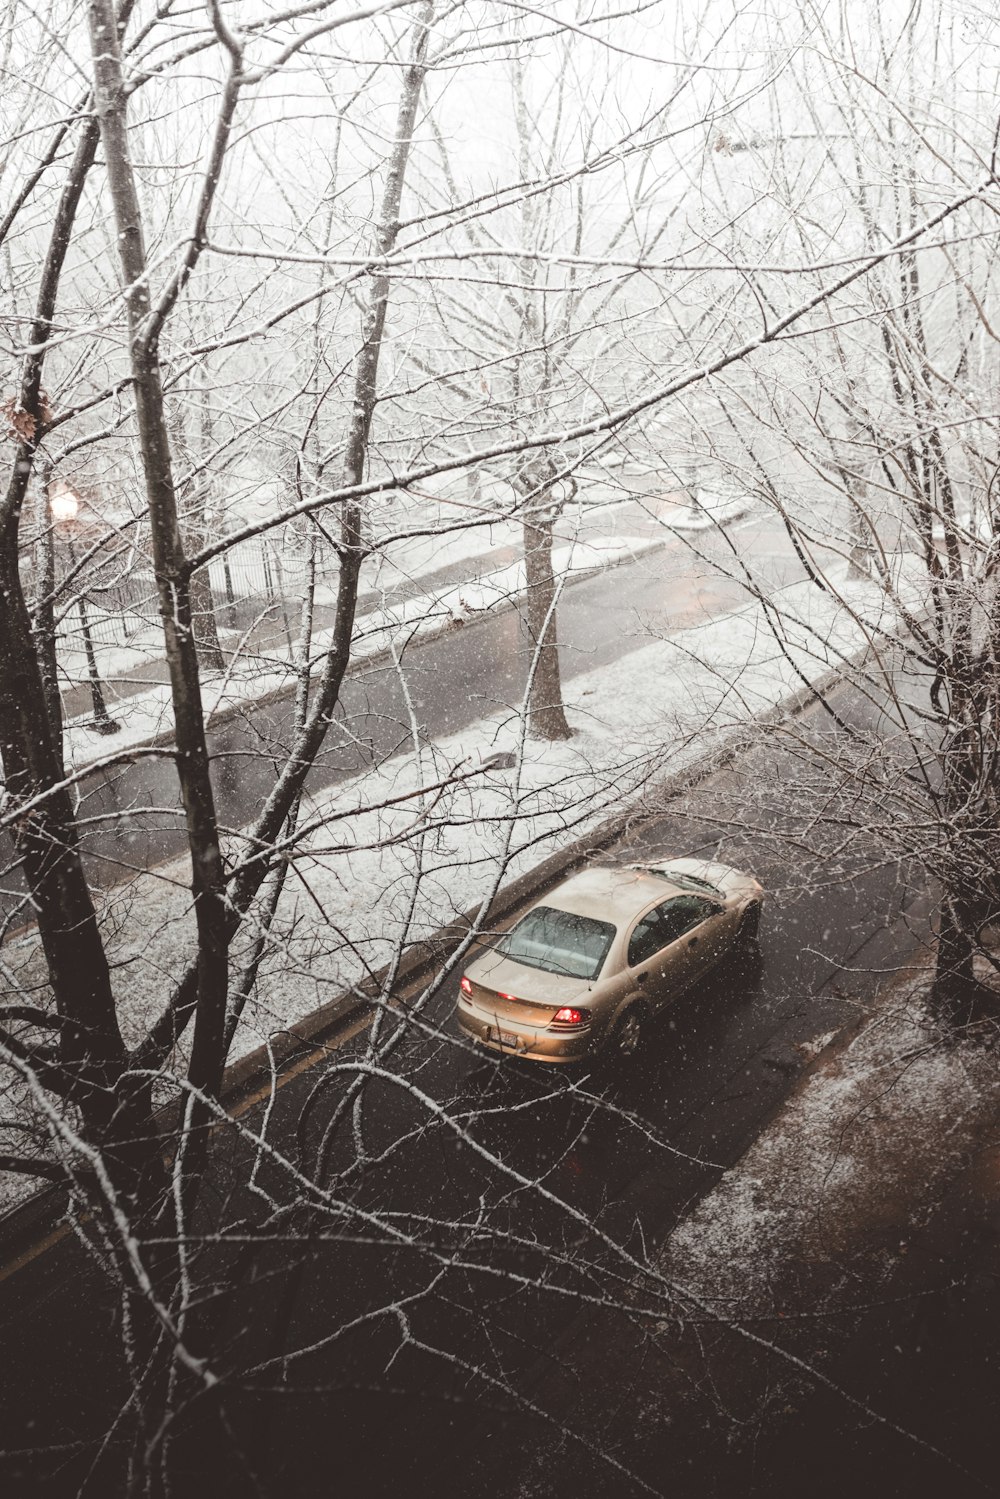 brown sedan running on the street surrounded with bare trees during winter